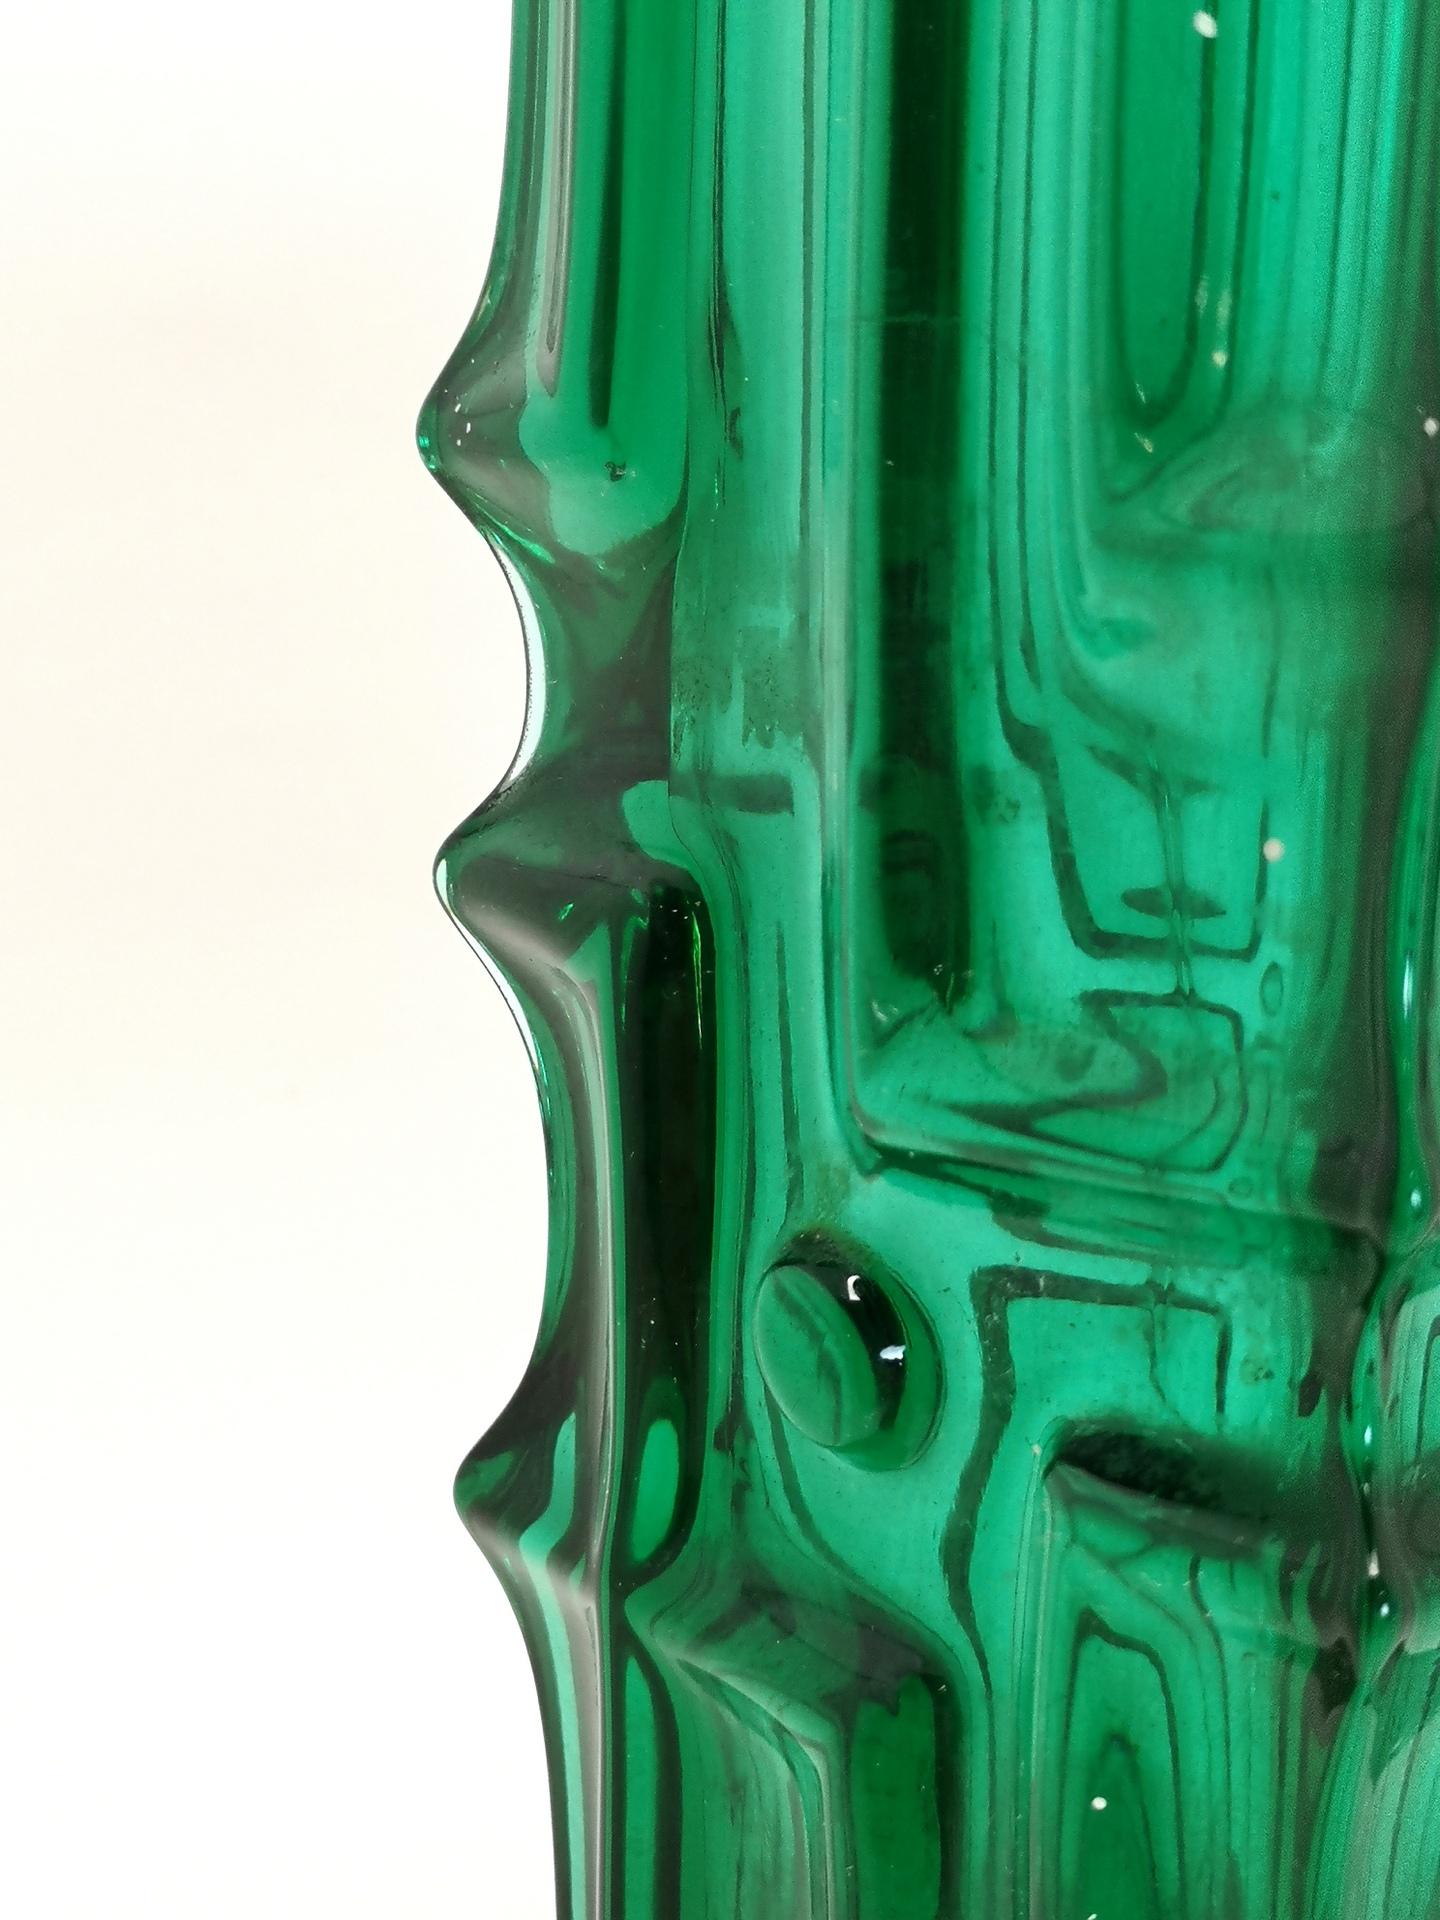 Late 20th Century Vintage Chartreuse Glass Vase, by Vladislav Urban for SKLO Union, 1970s